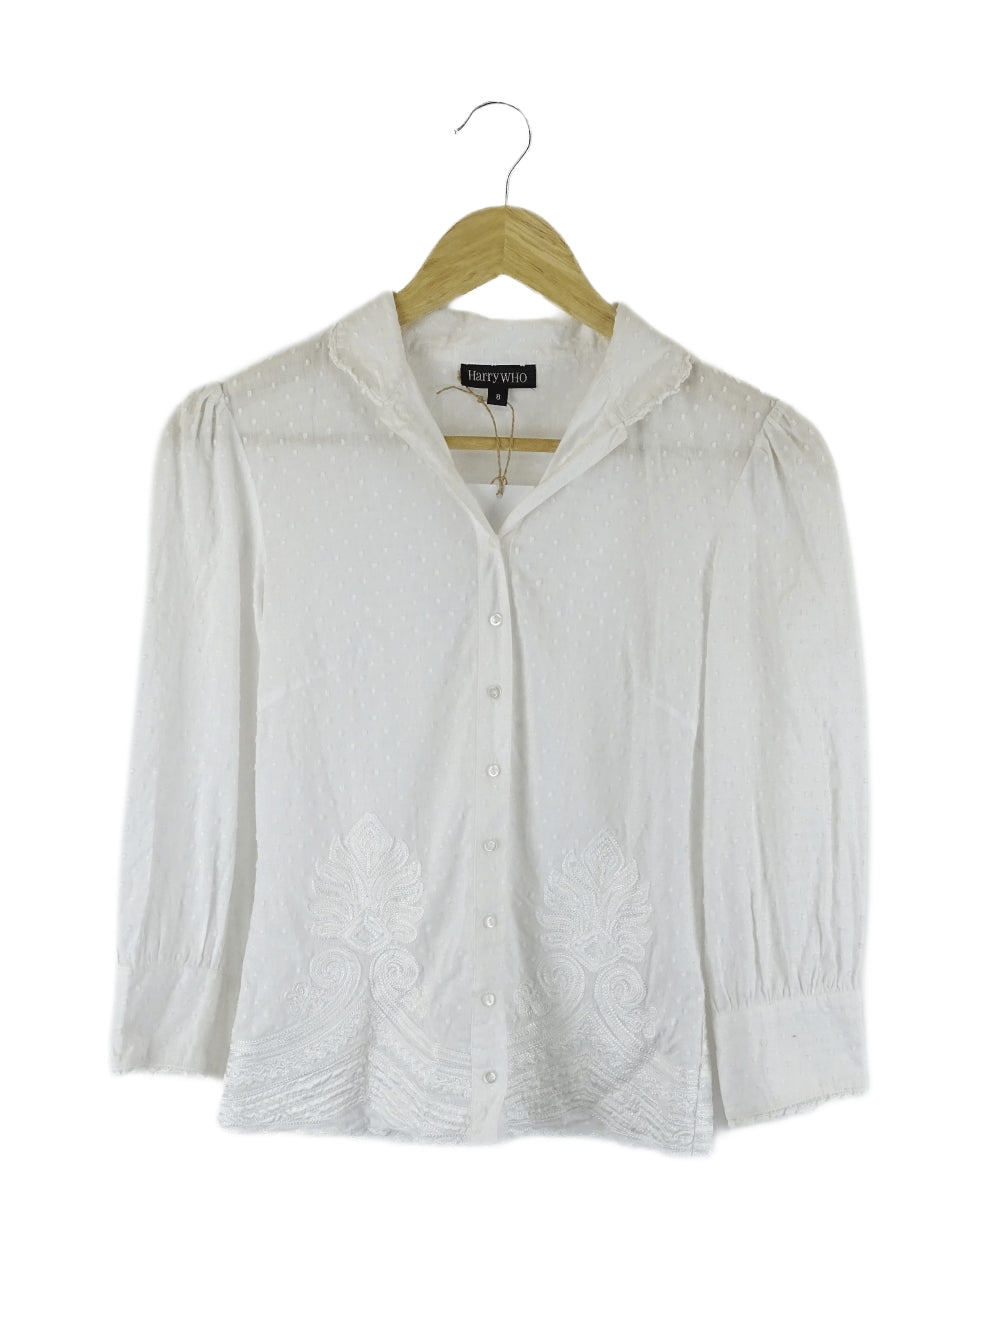 Harry Who White Button Up Embroidered Top 8